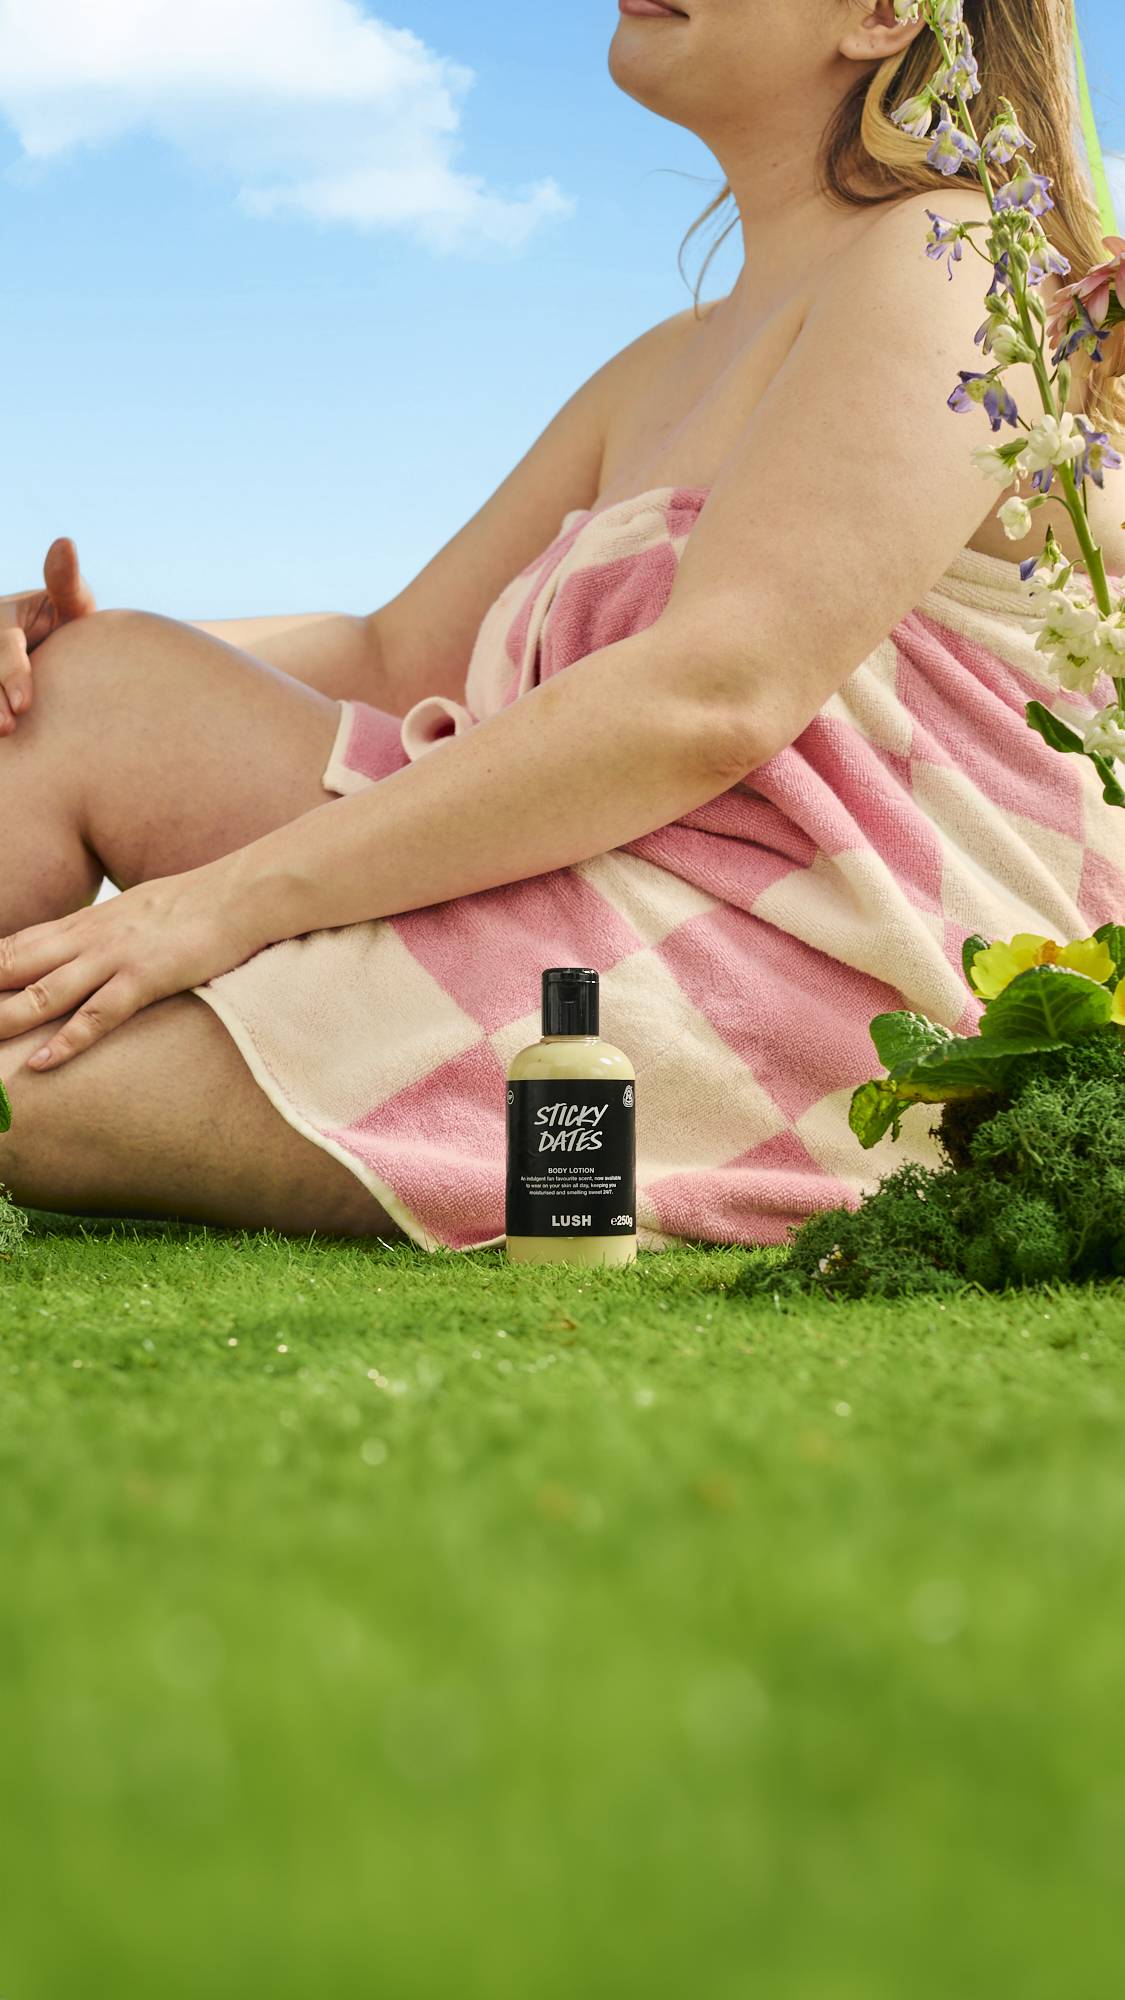 The model is wrapped in a pink and white towel as they sit on the grass under a blue sky while applying the Sticky Dates body lotion to their propped-up knee as the product sits in front. 